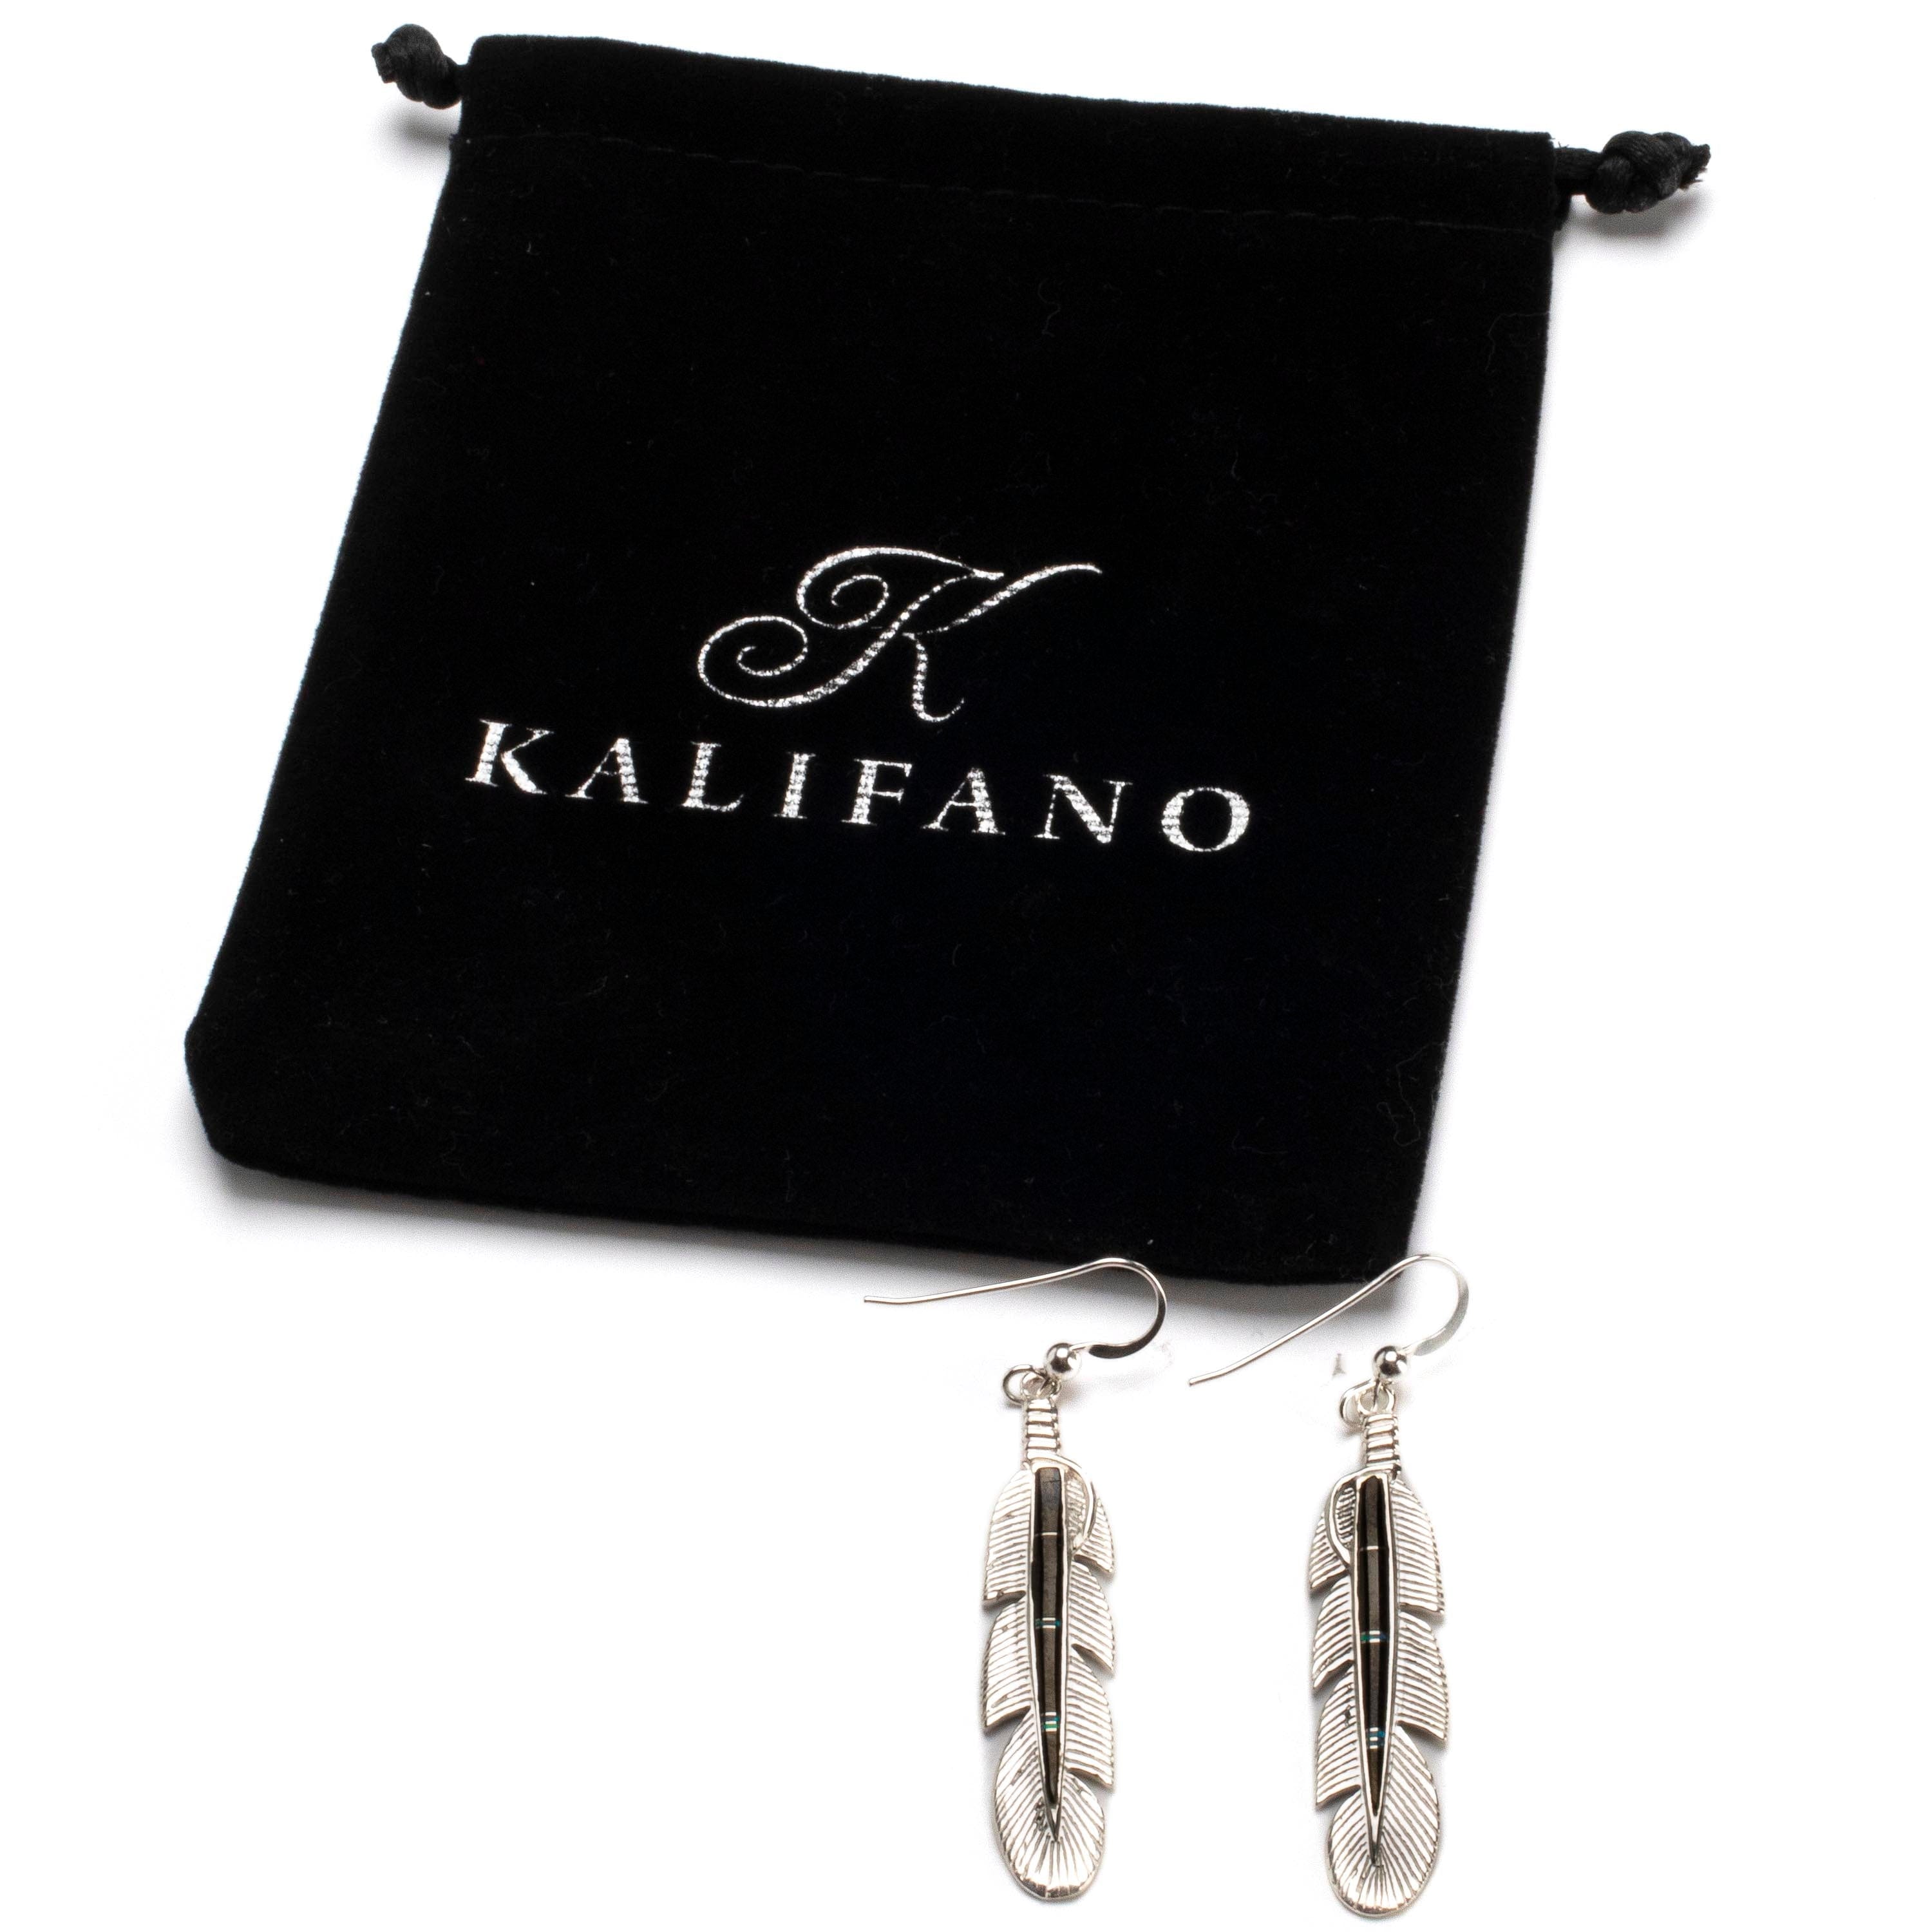 Kalifano Southwest Silver Jewelry Black Onyx Feather Earrings Handmade with Sterling Silver and Opal Accent NME.0741.BO